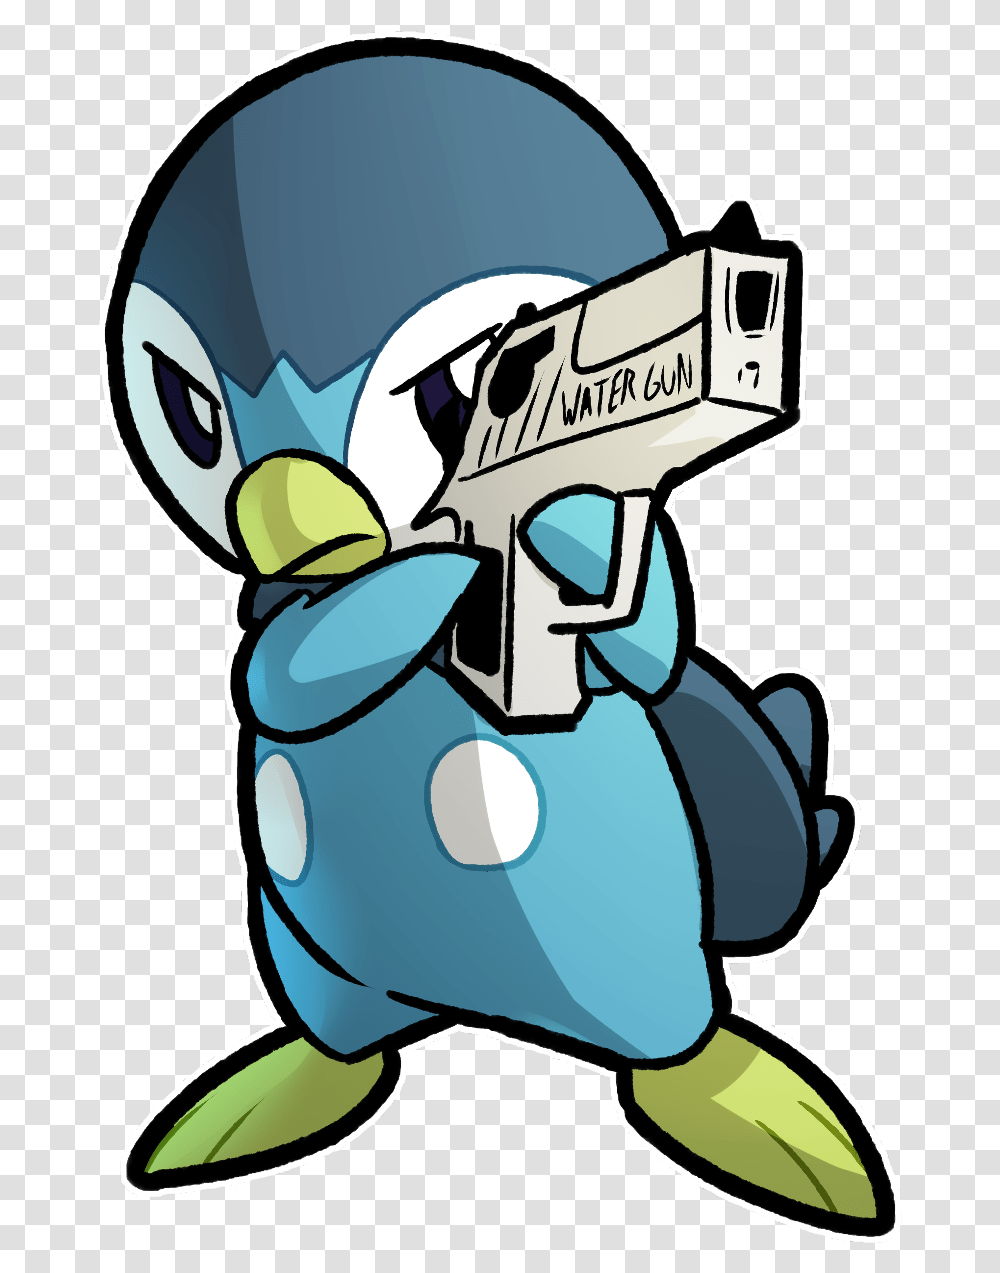 Piplup With A Gun Clipart Piplup Pokemon, Outdoors, Snow, Nature, Comics Transparent Png